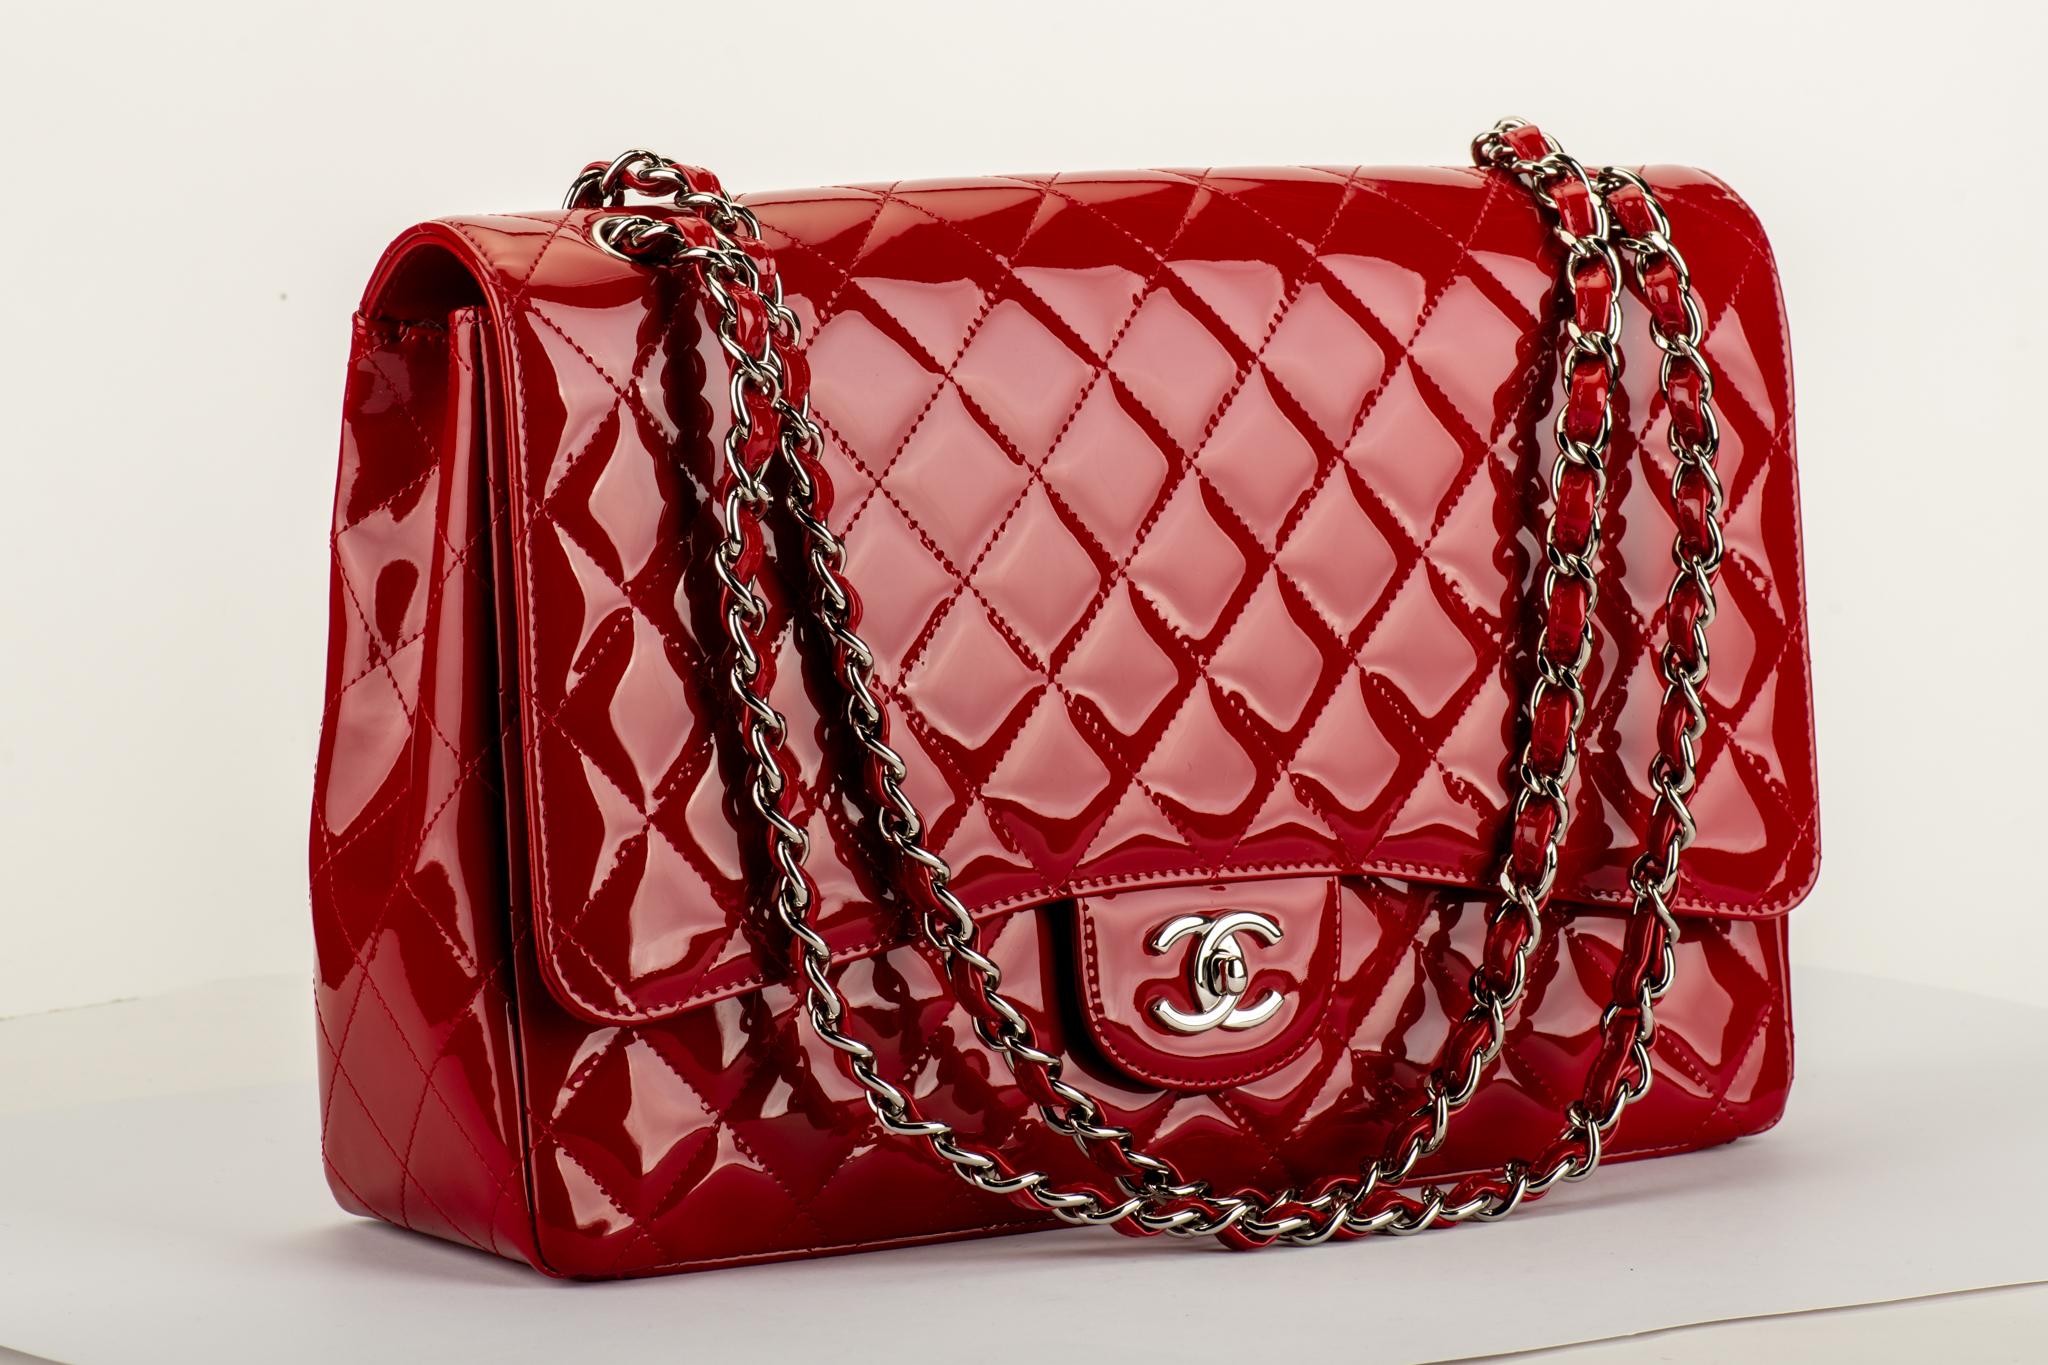 Chanel mint condition red patent leather maxi flap with silver tone hardware. Shoulder drop 11